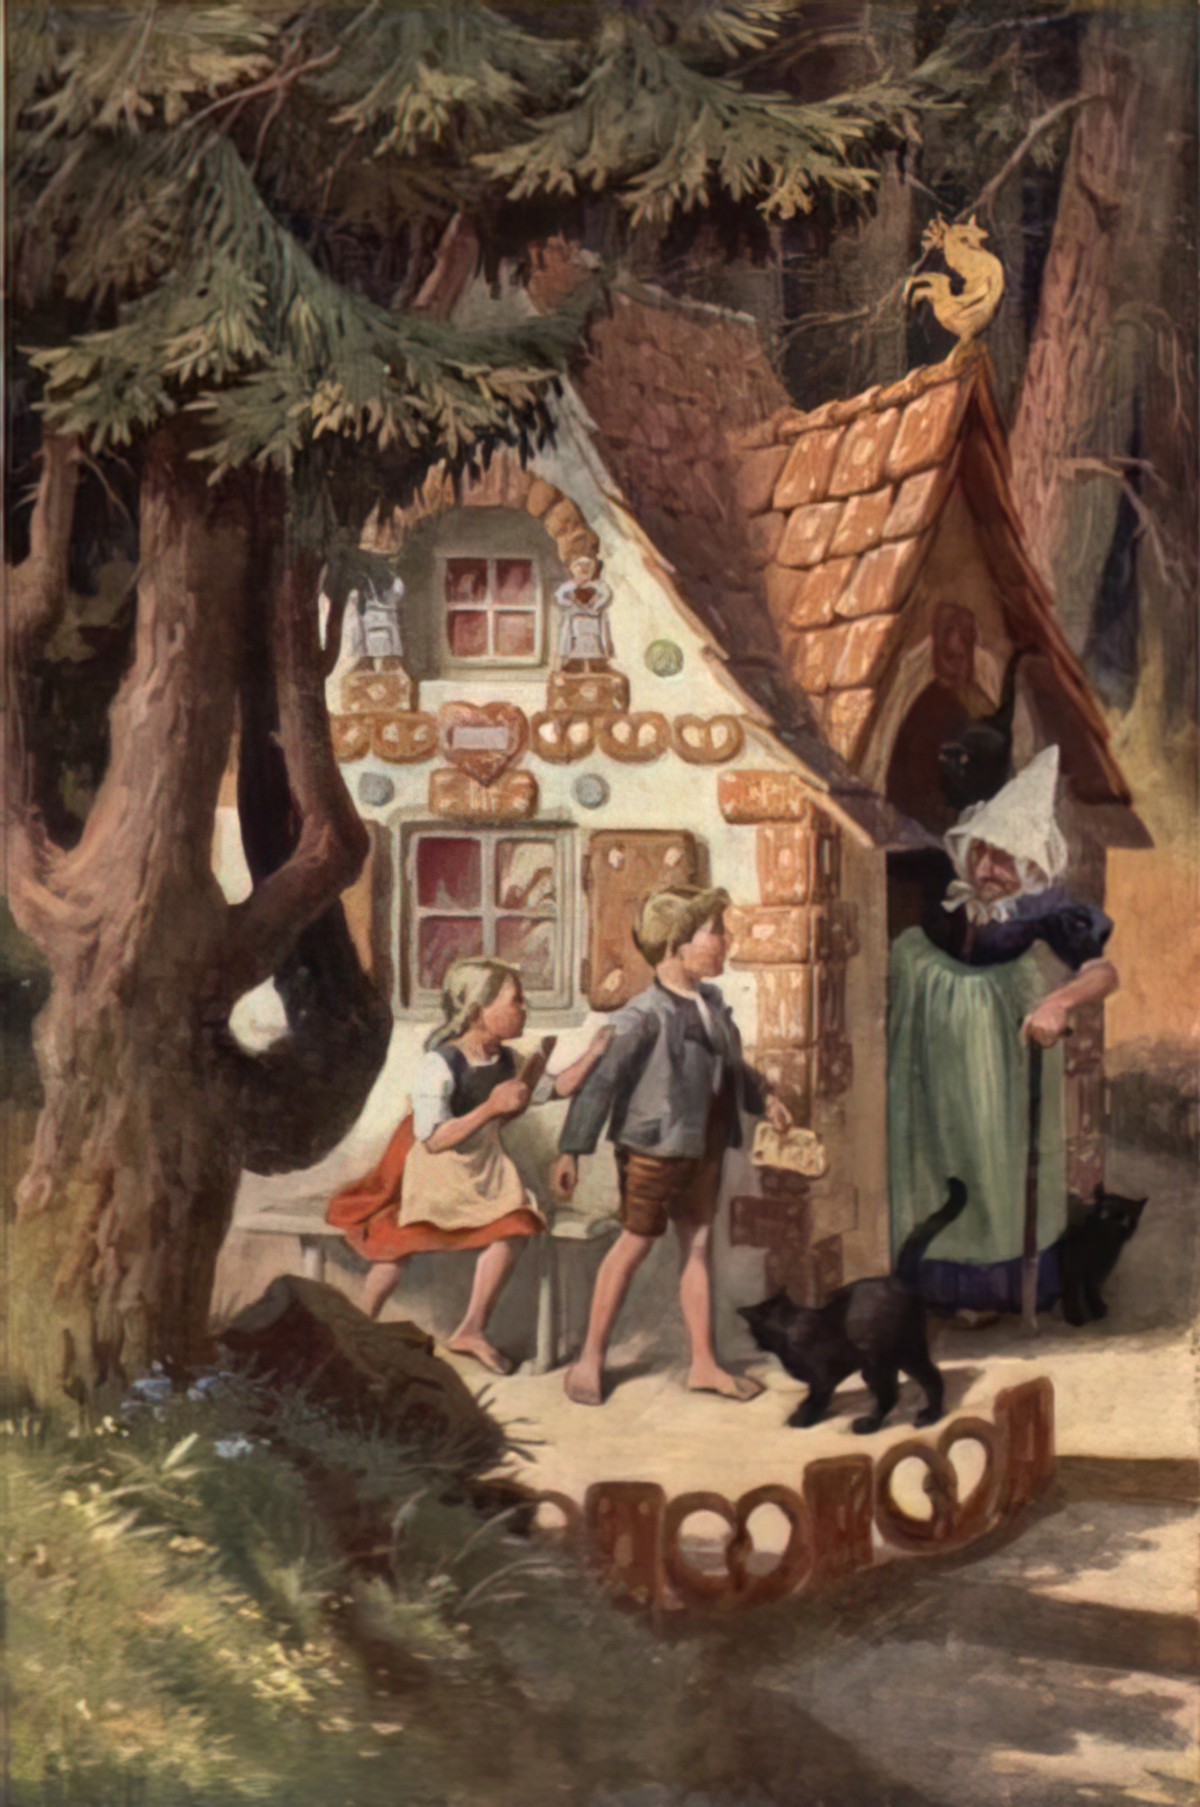 The Gingerbread House In Hansel And Gretel